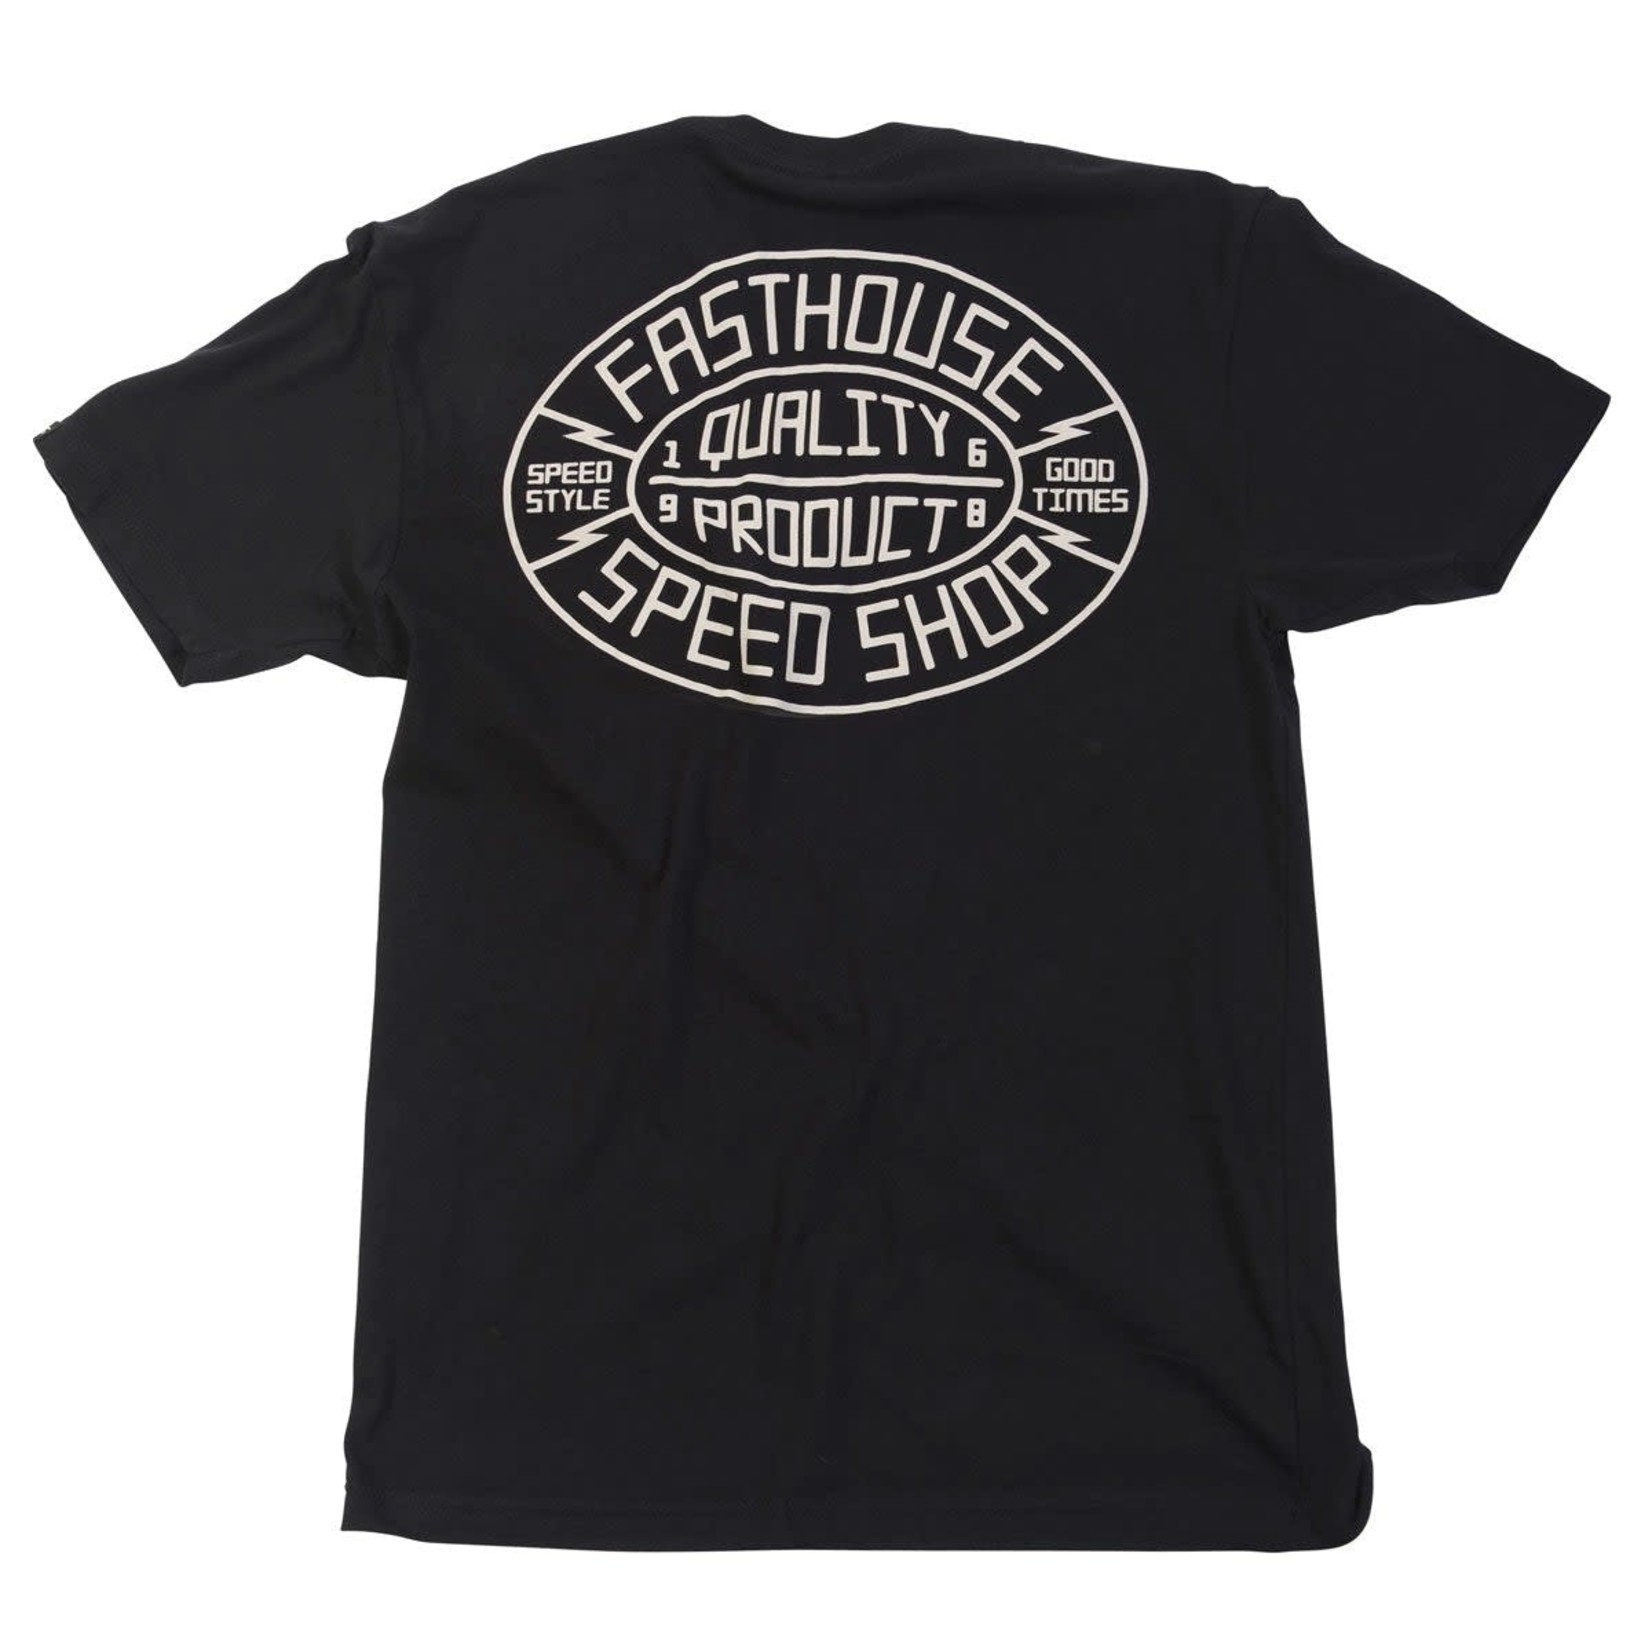 FASTHOUSE Forge Tee, Black